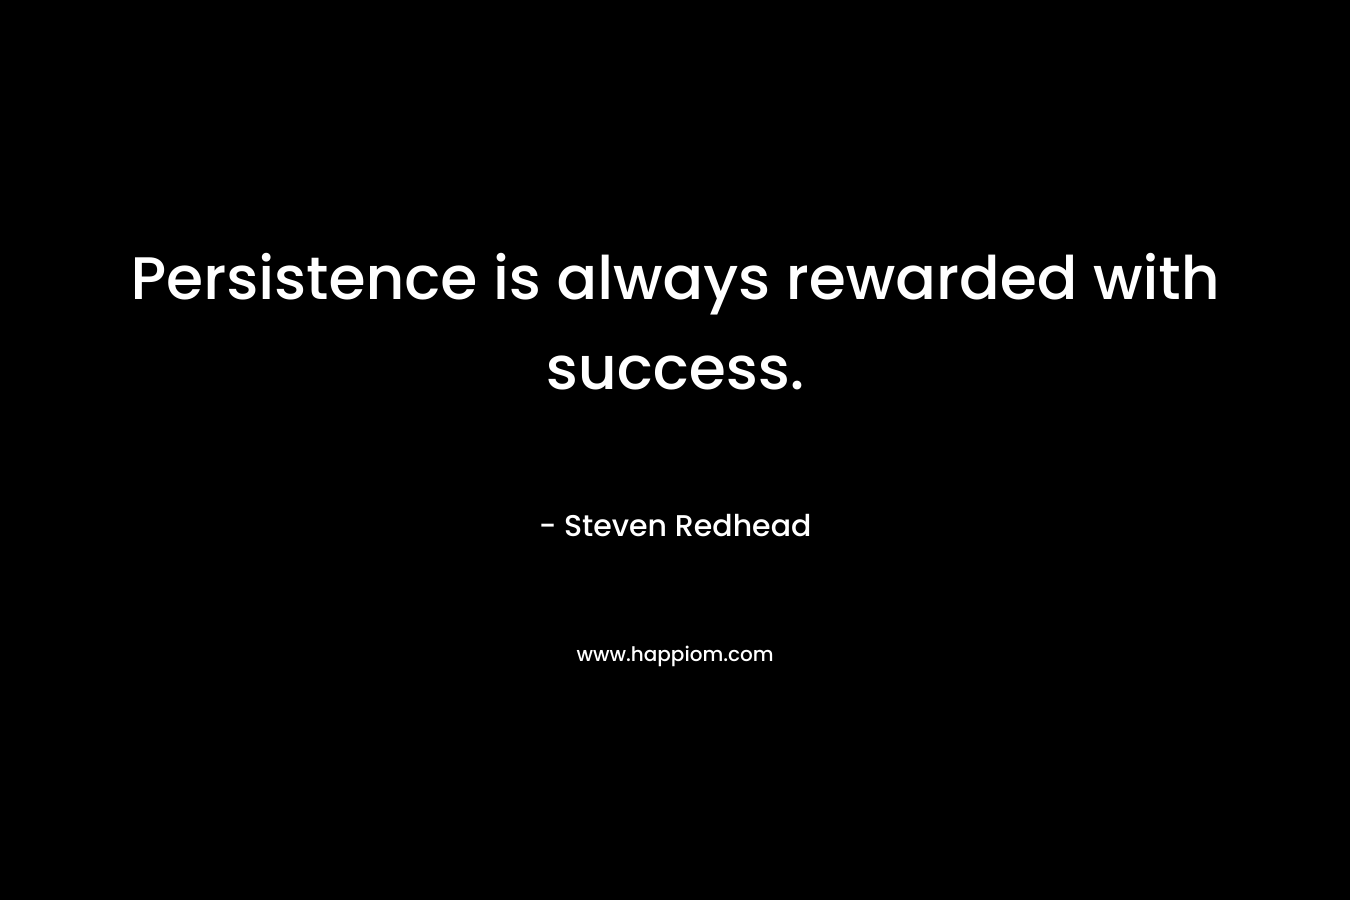 Persistence is always rewarded with success.